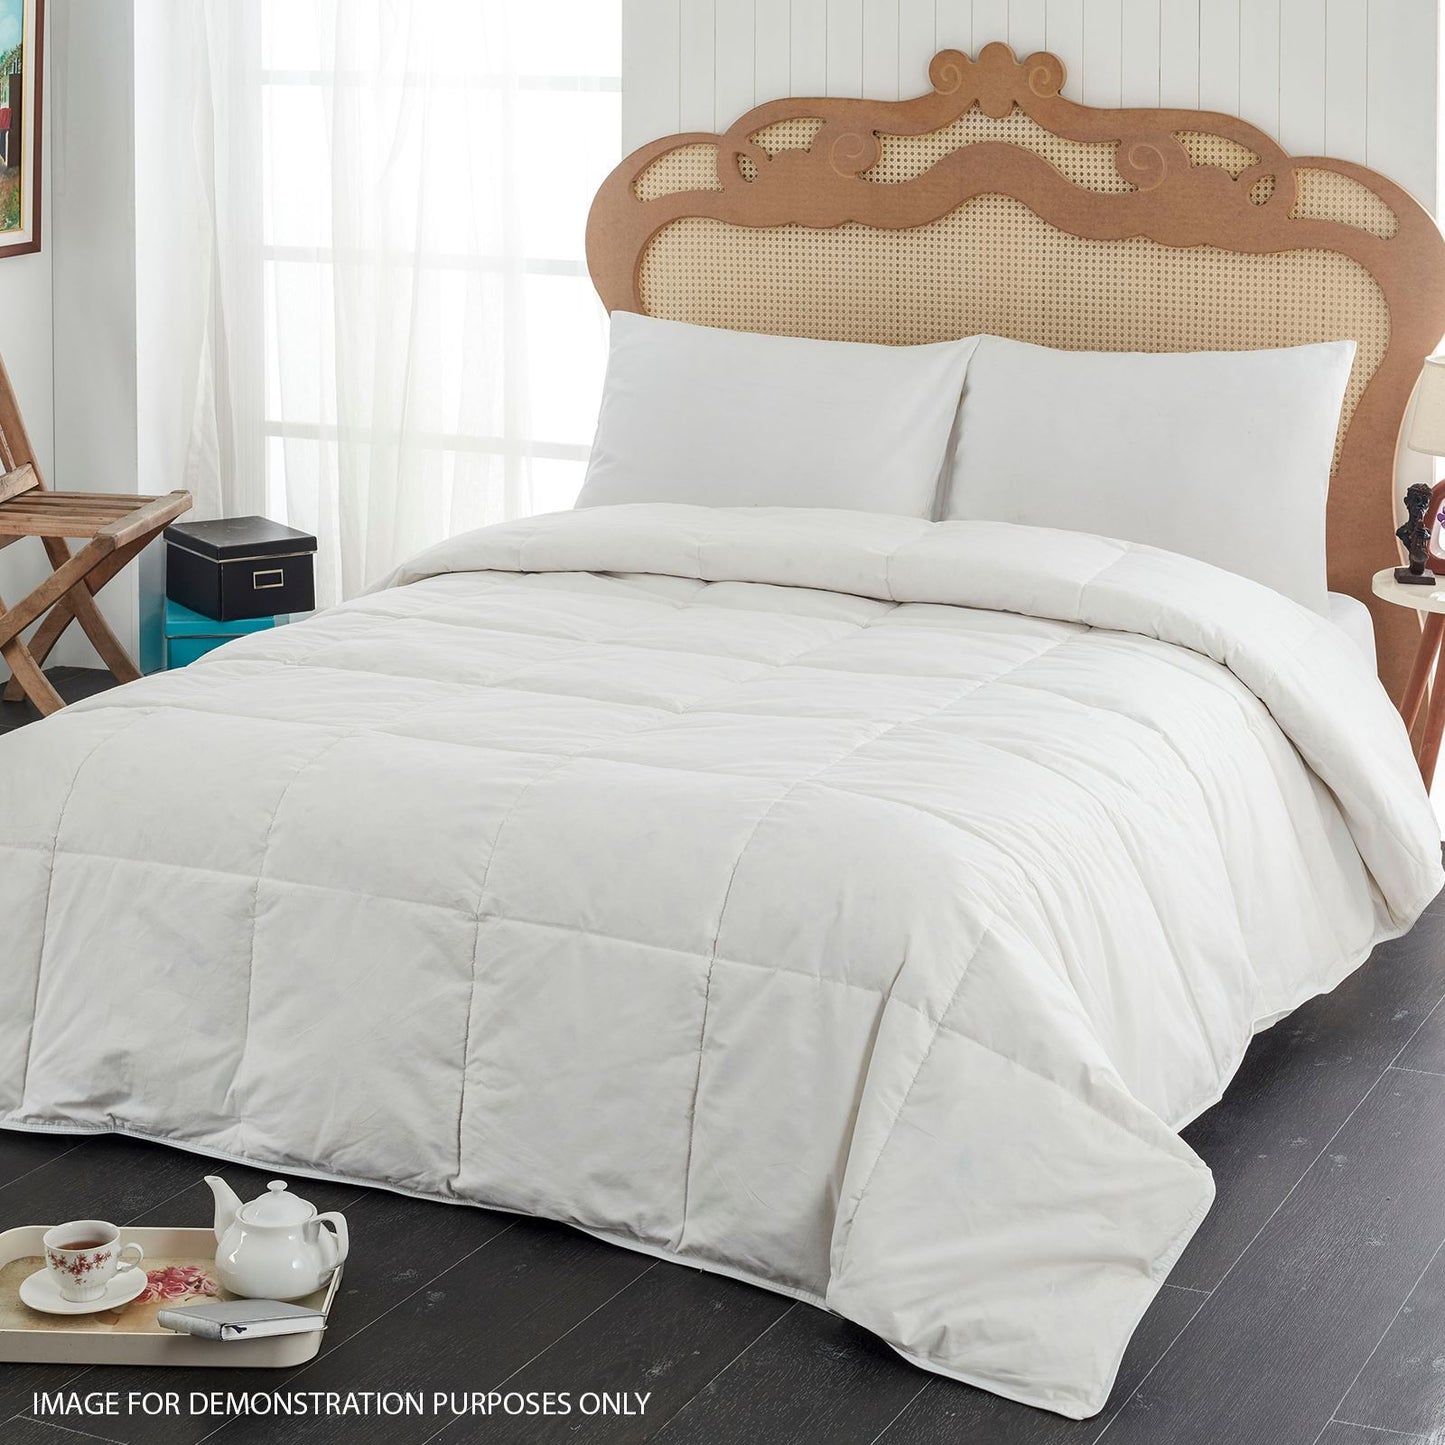 Sleep in Comfort with a Duck Feather Duvet